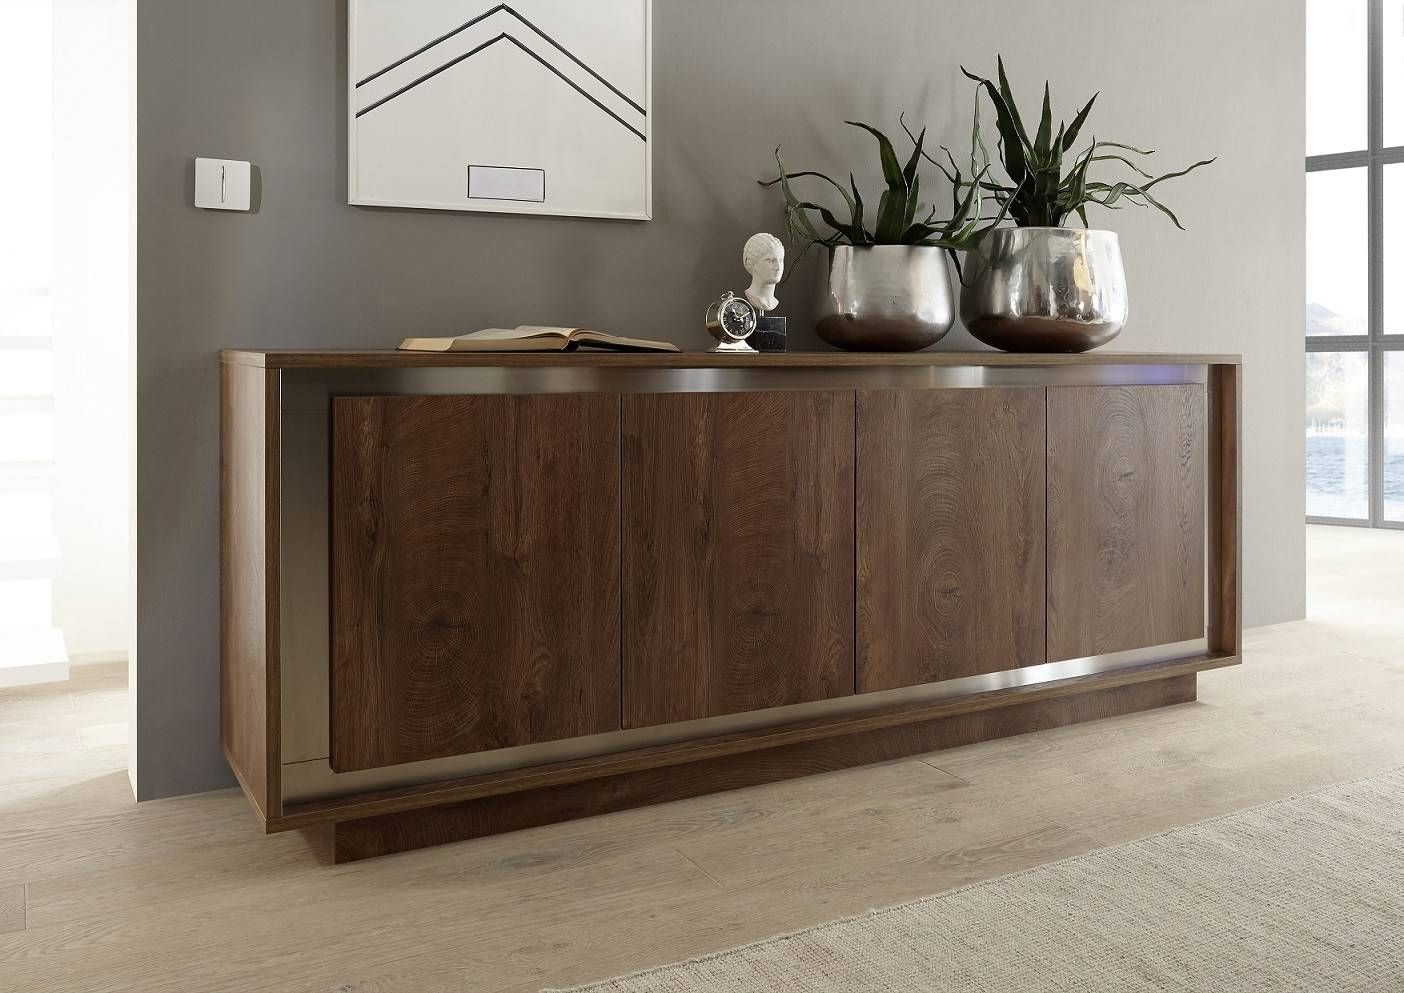 Amber Modern Sideboard In Oak Cognac Finish With Inlays Pertaining To Bespoke Sideboards (View 5 of 15)